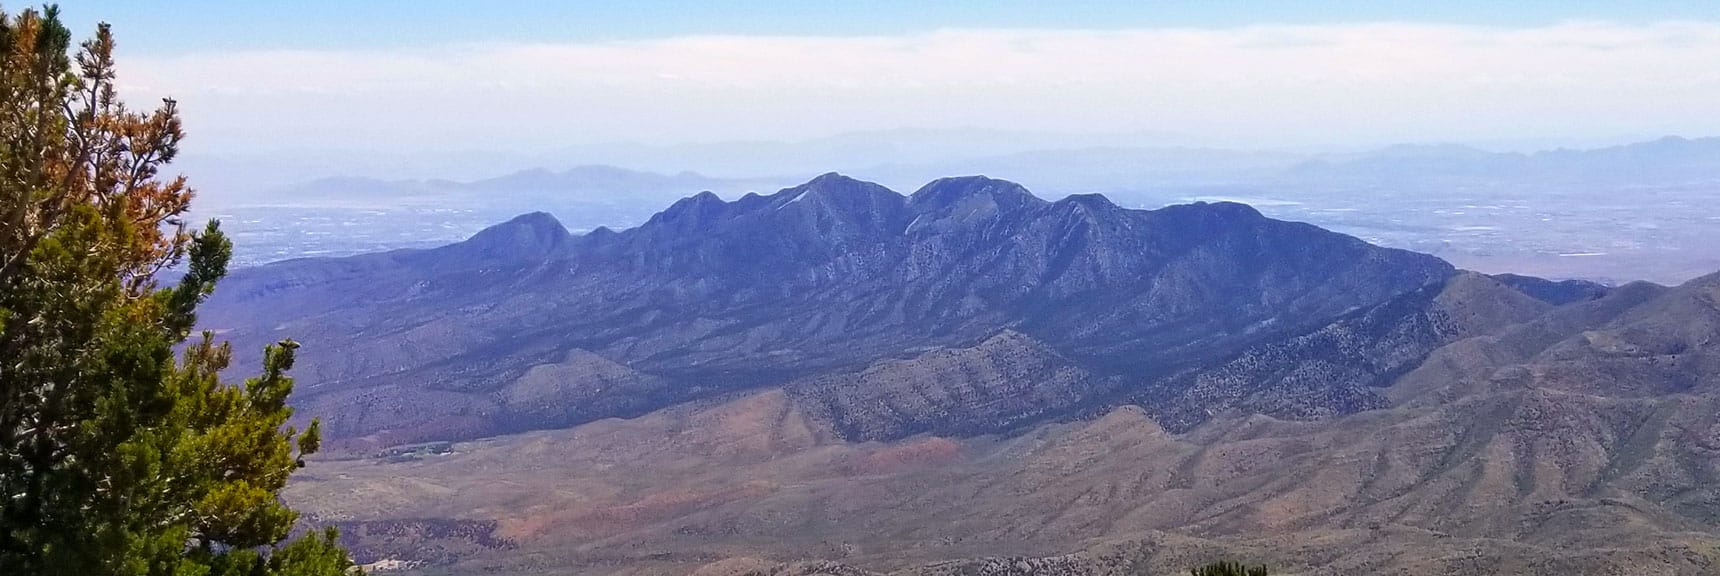 View of La Madre Mountains Wilderness from Harris Mountain Summit, Nevada